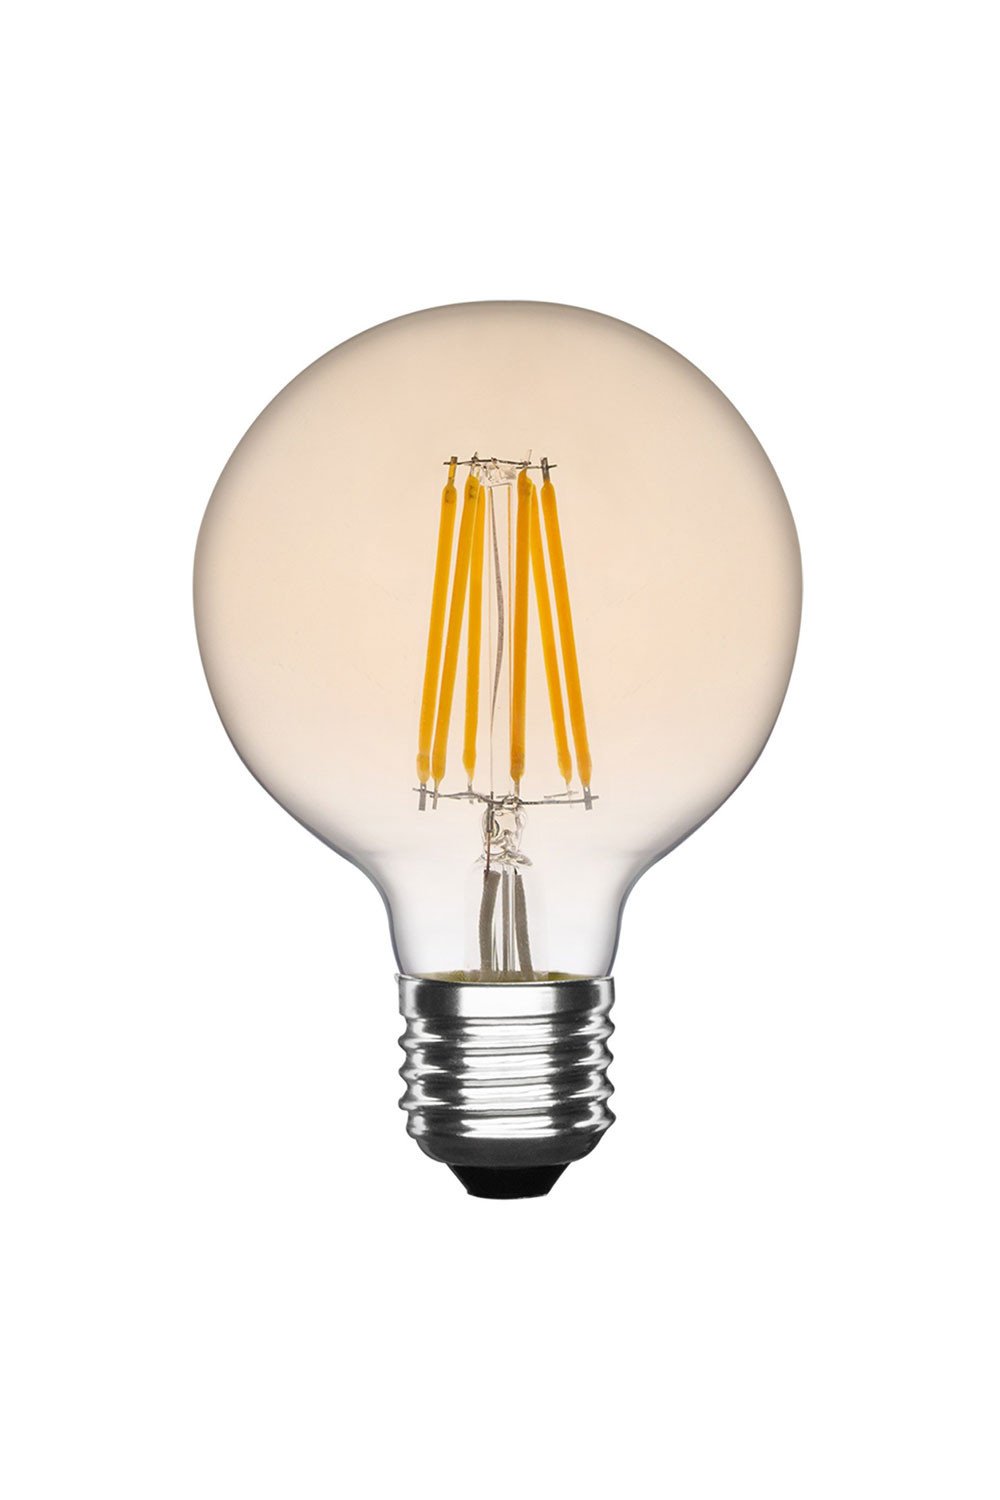 Gradient Bulb Odyss , gallery image 1